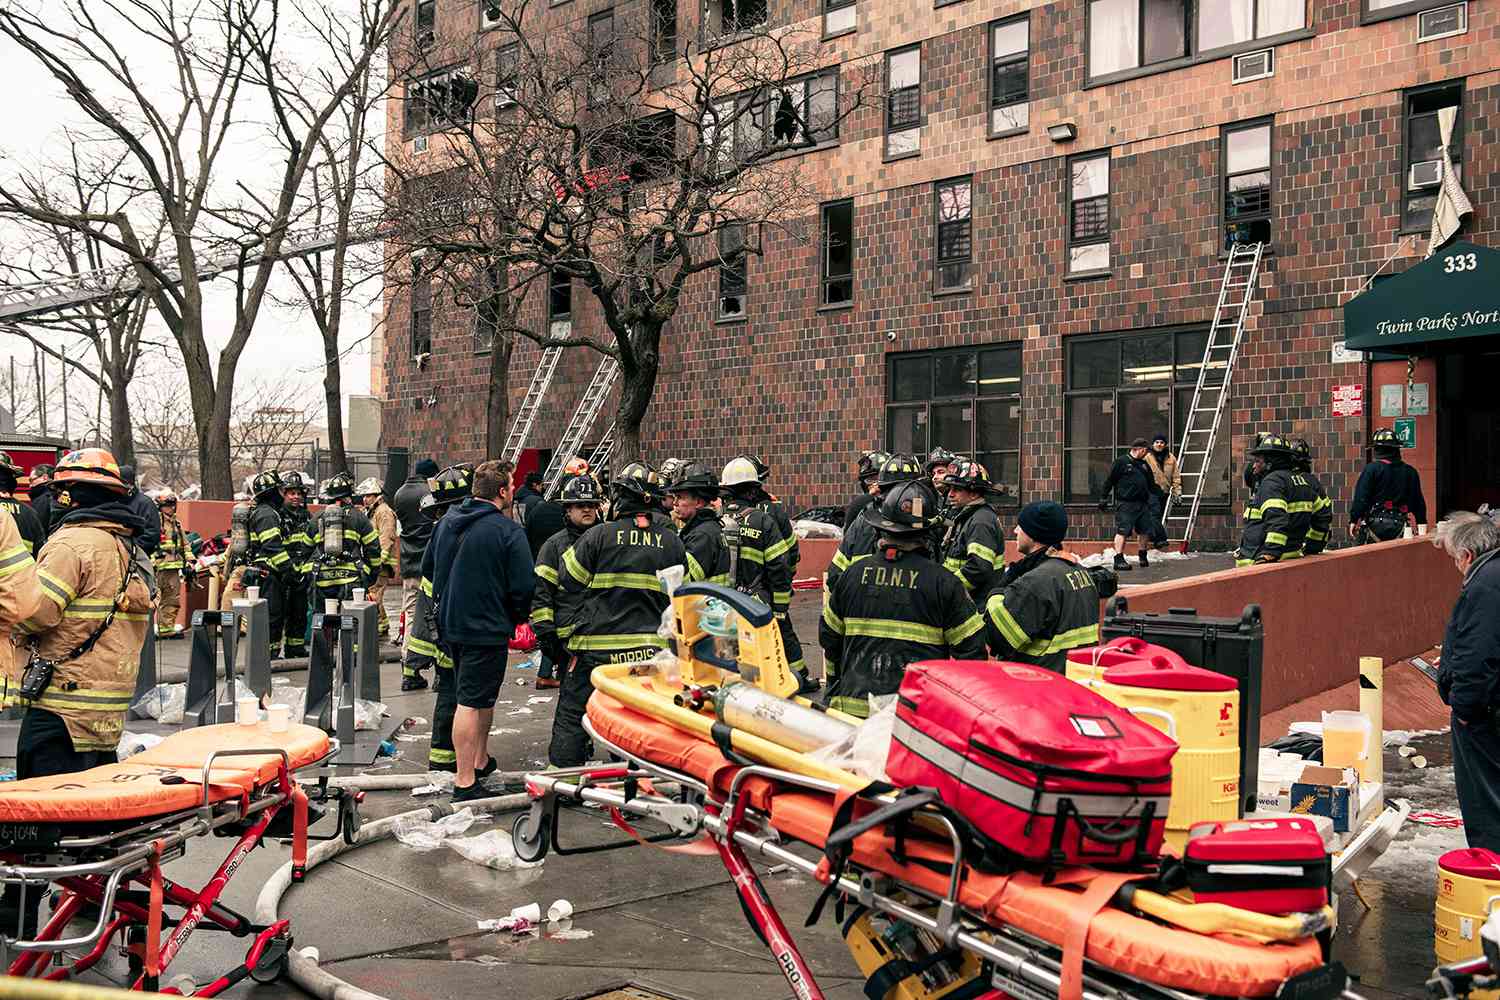 Emergency first responders remain at the scene of an intense fire at a 19-story residential building that erupted in the morning on January 9, 2022 in the Bronx borough of New York City. Reports indicate over 50 people were injured.